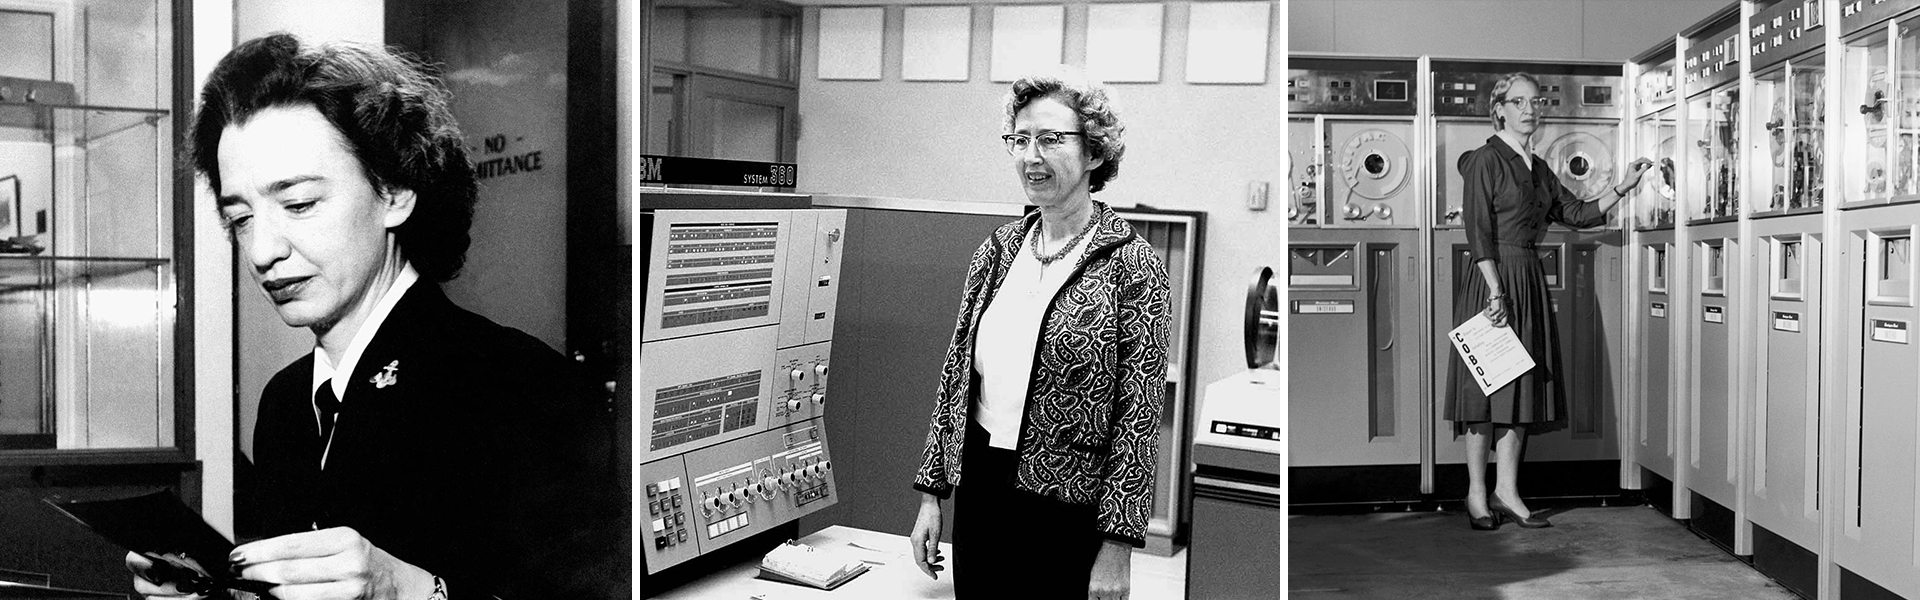 Three vintage black and white photos of Grace Hopper. Left, a young Hopper in military uniform. Middle, a younger Hopper stands in front of an IBM System 360 device. Right, an older Hopper stands in front of large computer devices the size of refrigerators with tape spools.